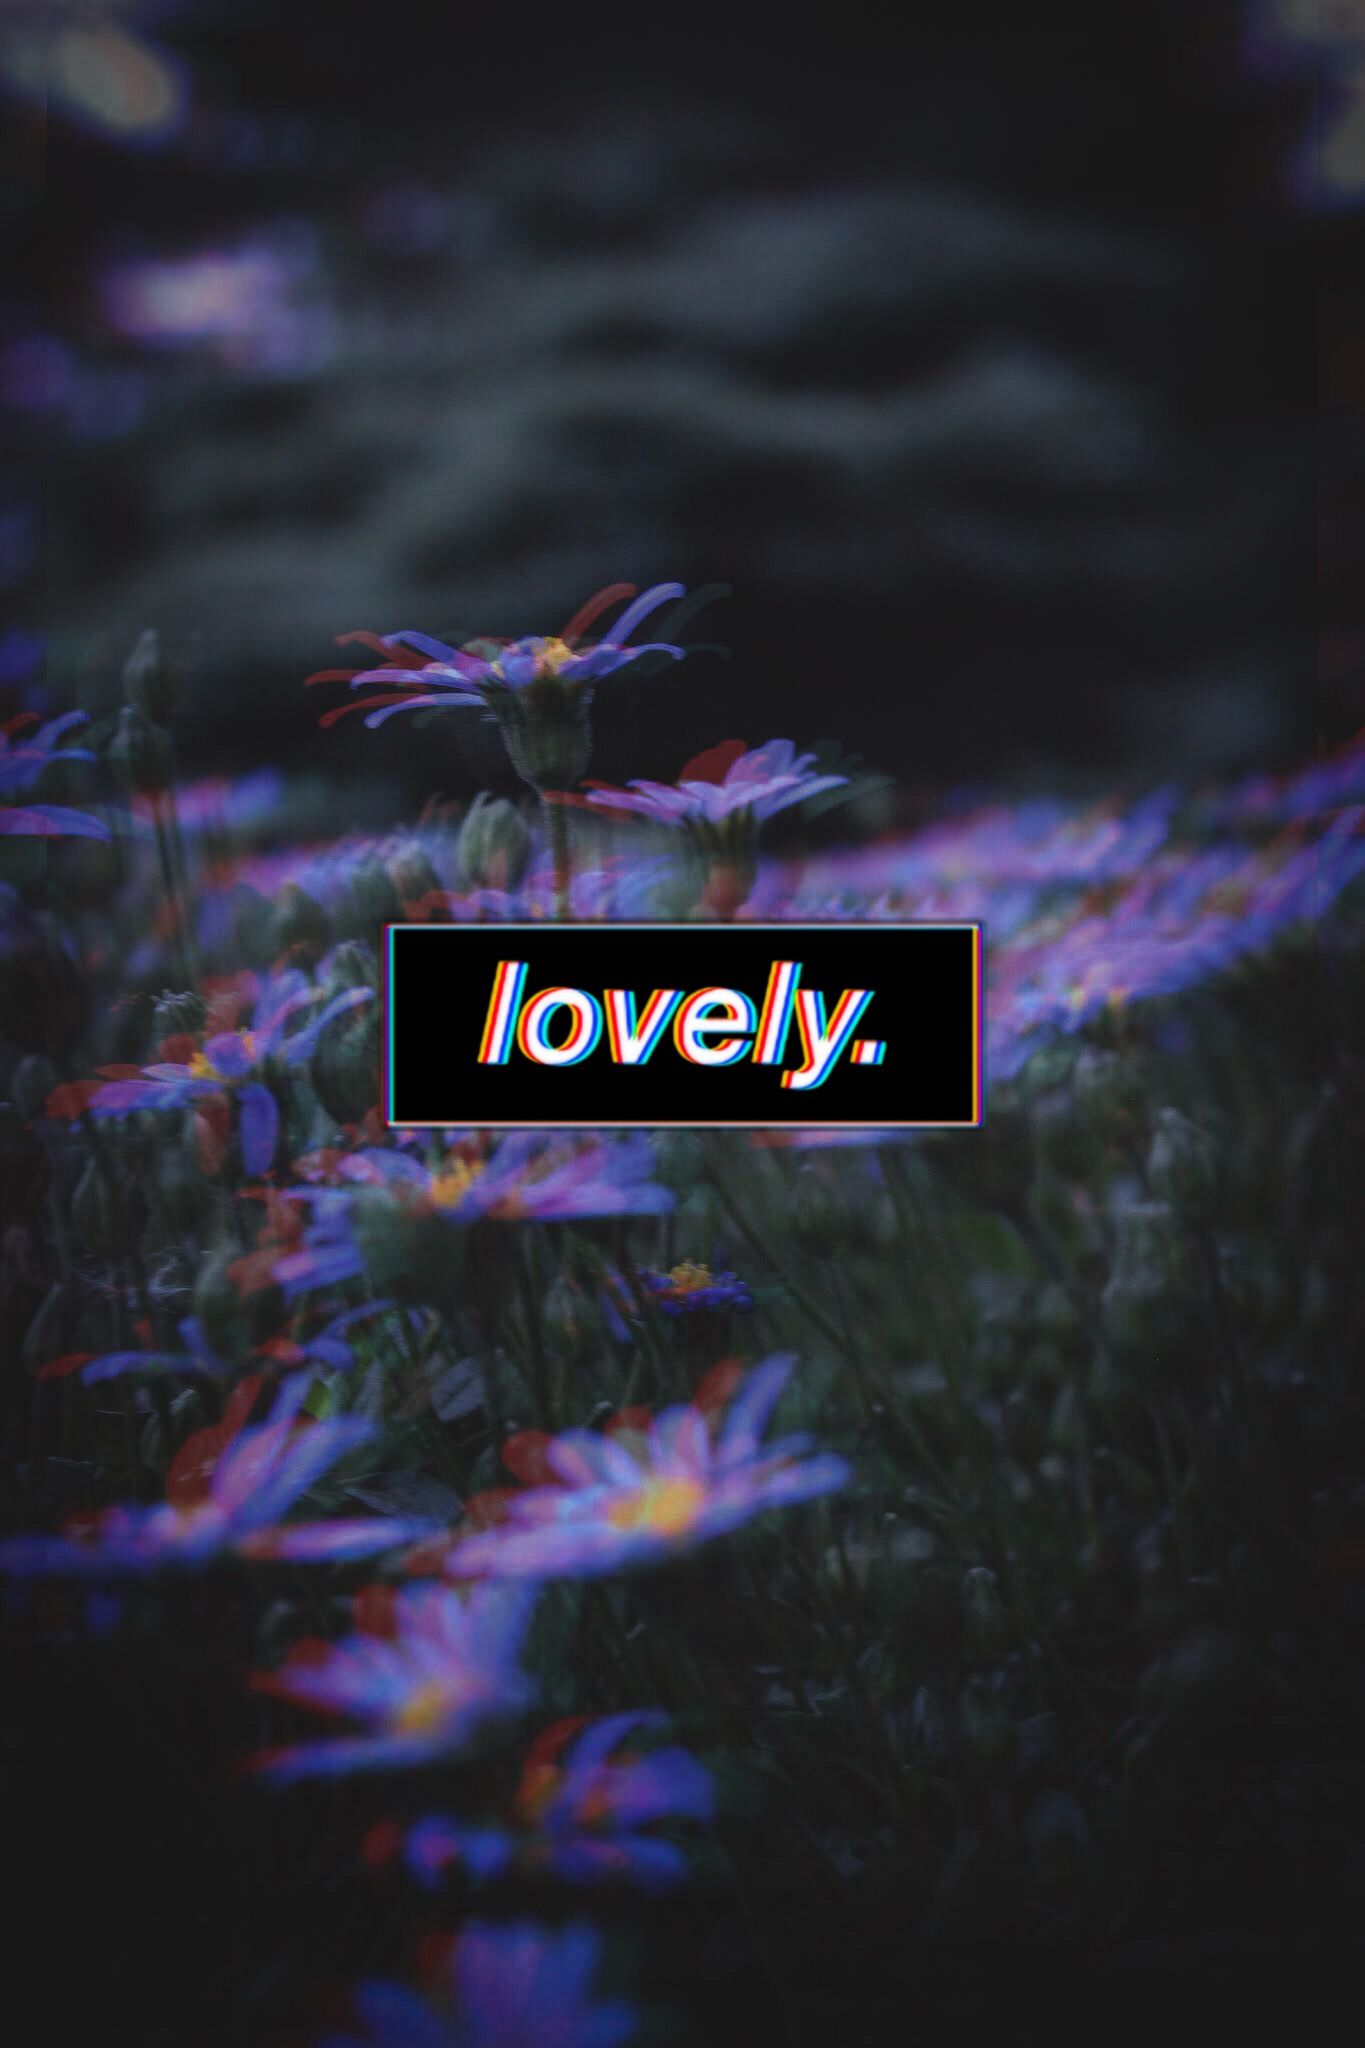 A picture of some flowers with the word lovely on it - Glitch